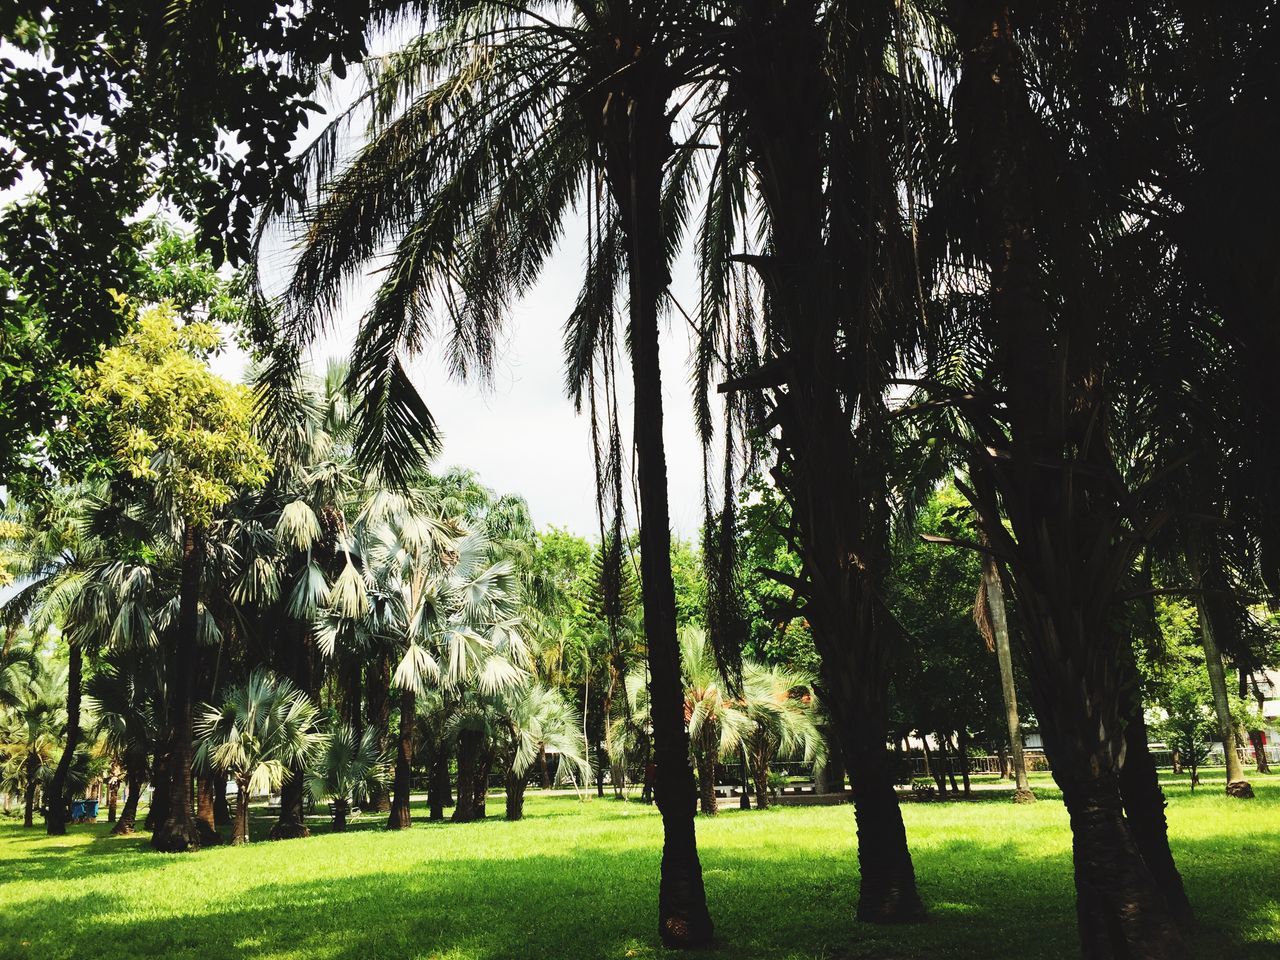 tree, grass, growth, palm tree, nature, beauty in nature, landscape, tranquility, tree trunk, no people, scenics, outdoors, scenery, sky, day